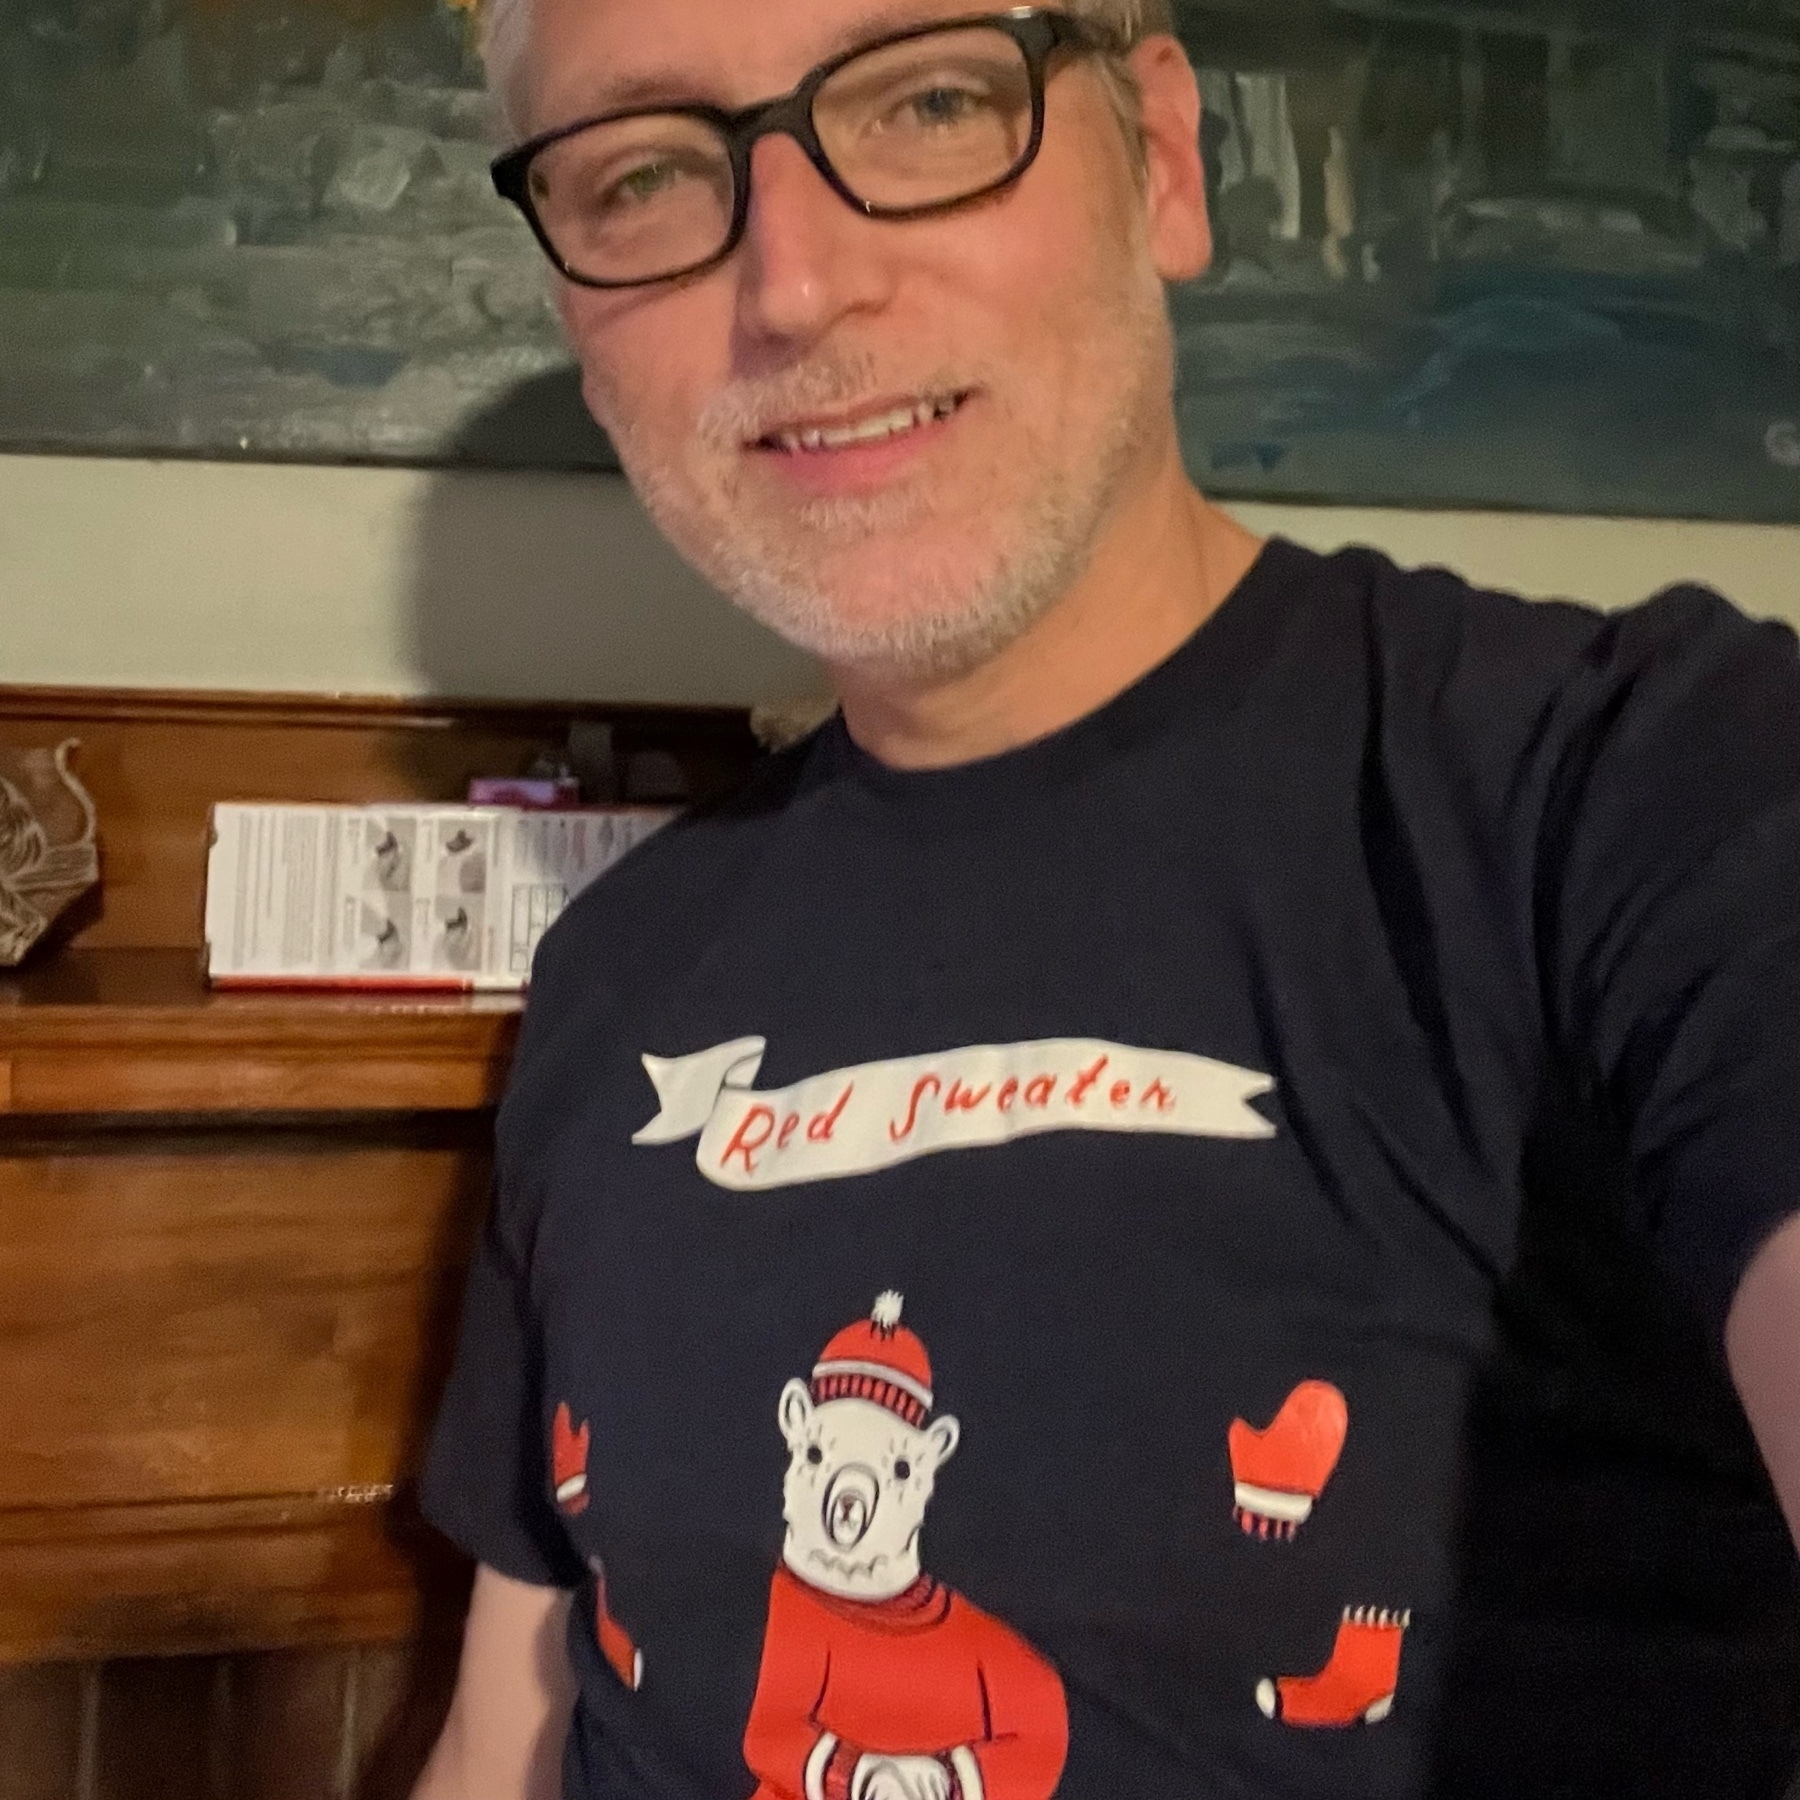 selfie wearing a shirt with "red sweater" text and a picture of a polar bear wearing a red sweater